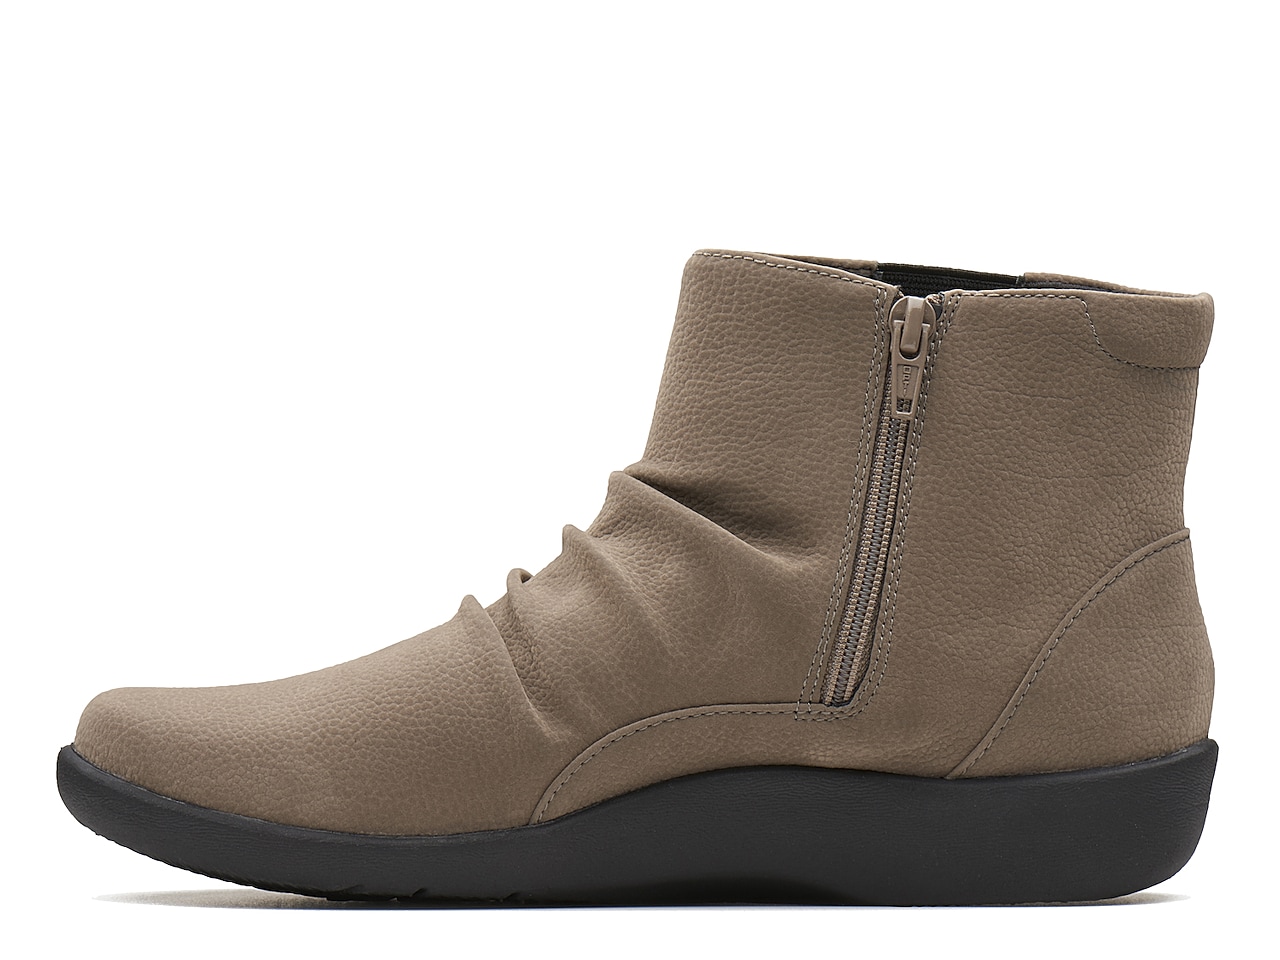 Cloudsteppers by Clarks Sillian Rima Bootie | DSW